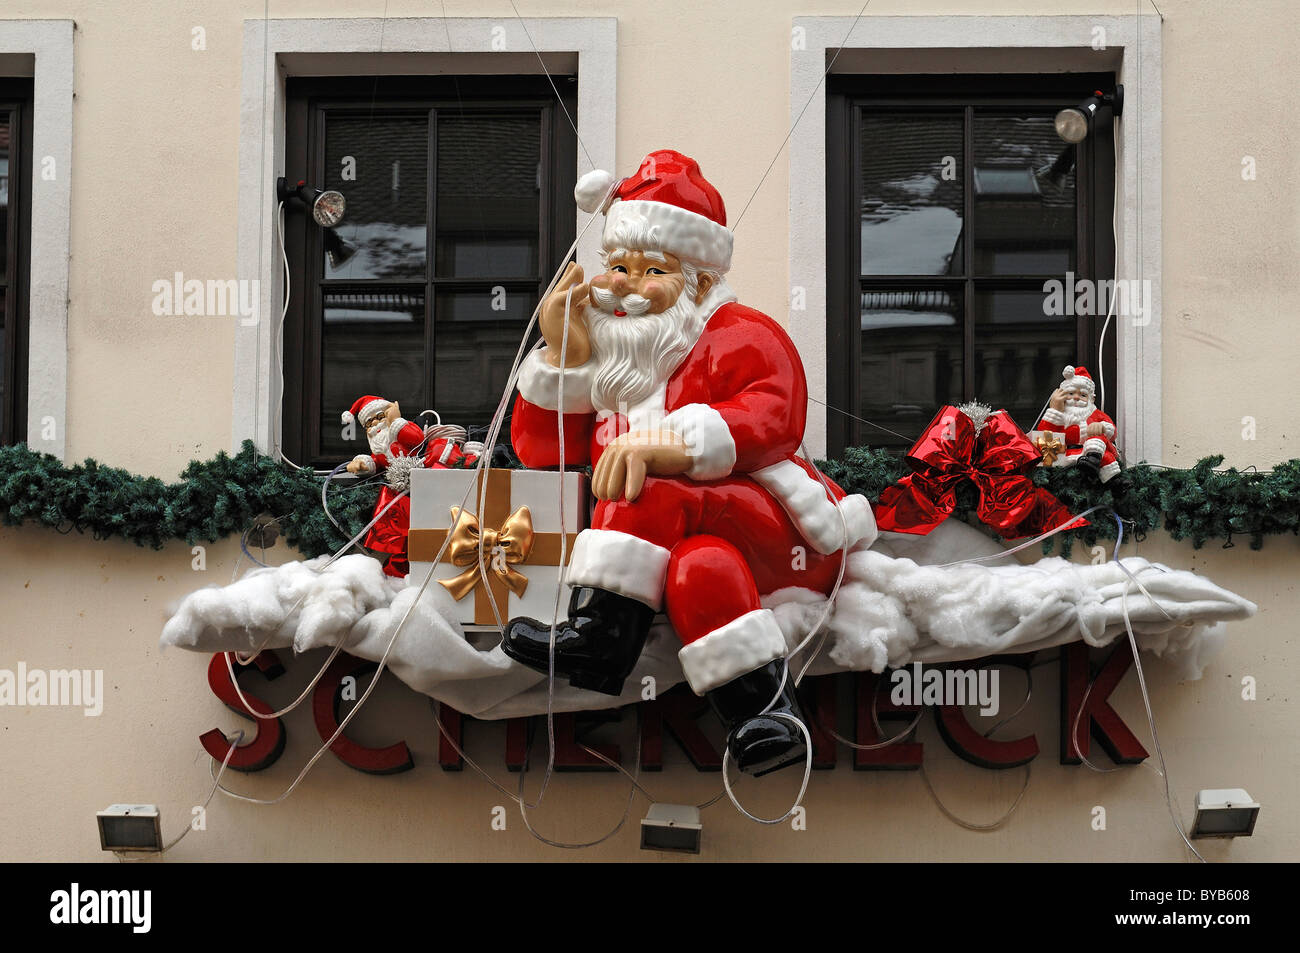 Santa Claus Franconia, commercial Middle - Photo decoration Bavaria, Erlangen, Alamy Germany, Stock building, figure Europe a outside